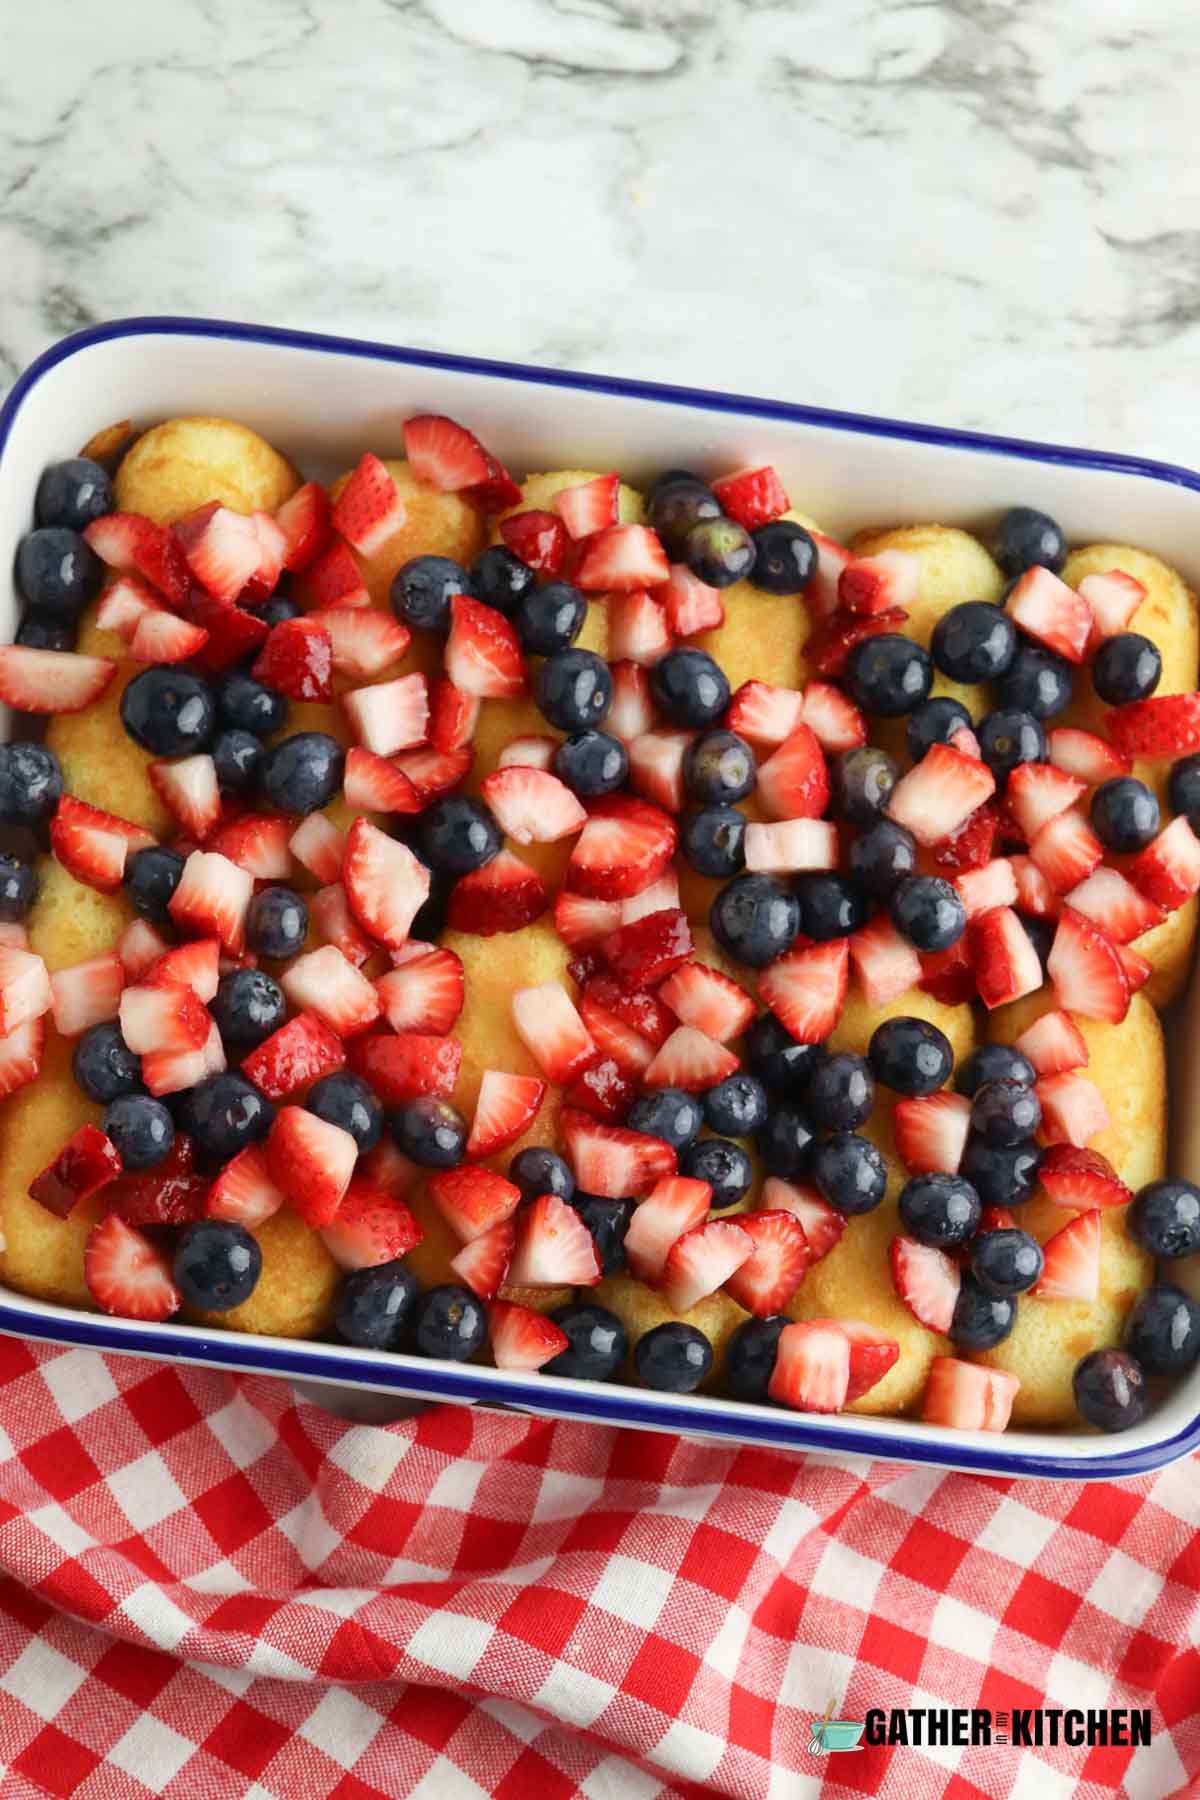 Strawberries and blueberries sprinkled over the Twinkies.